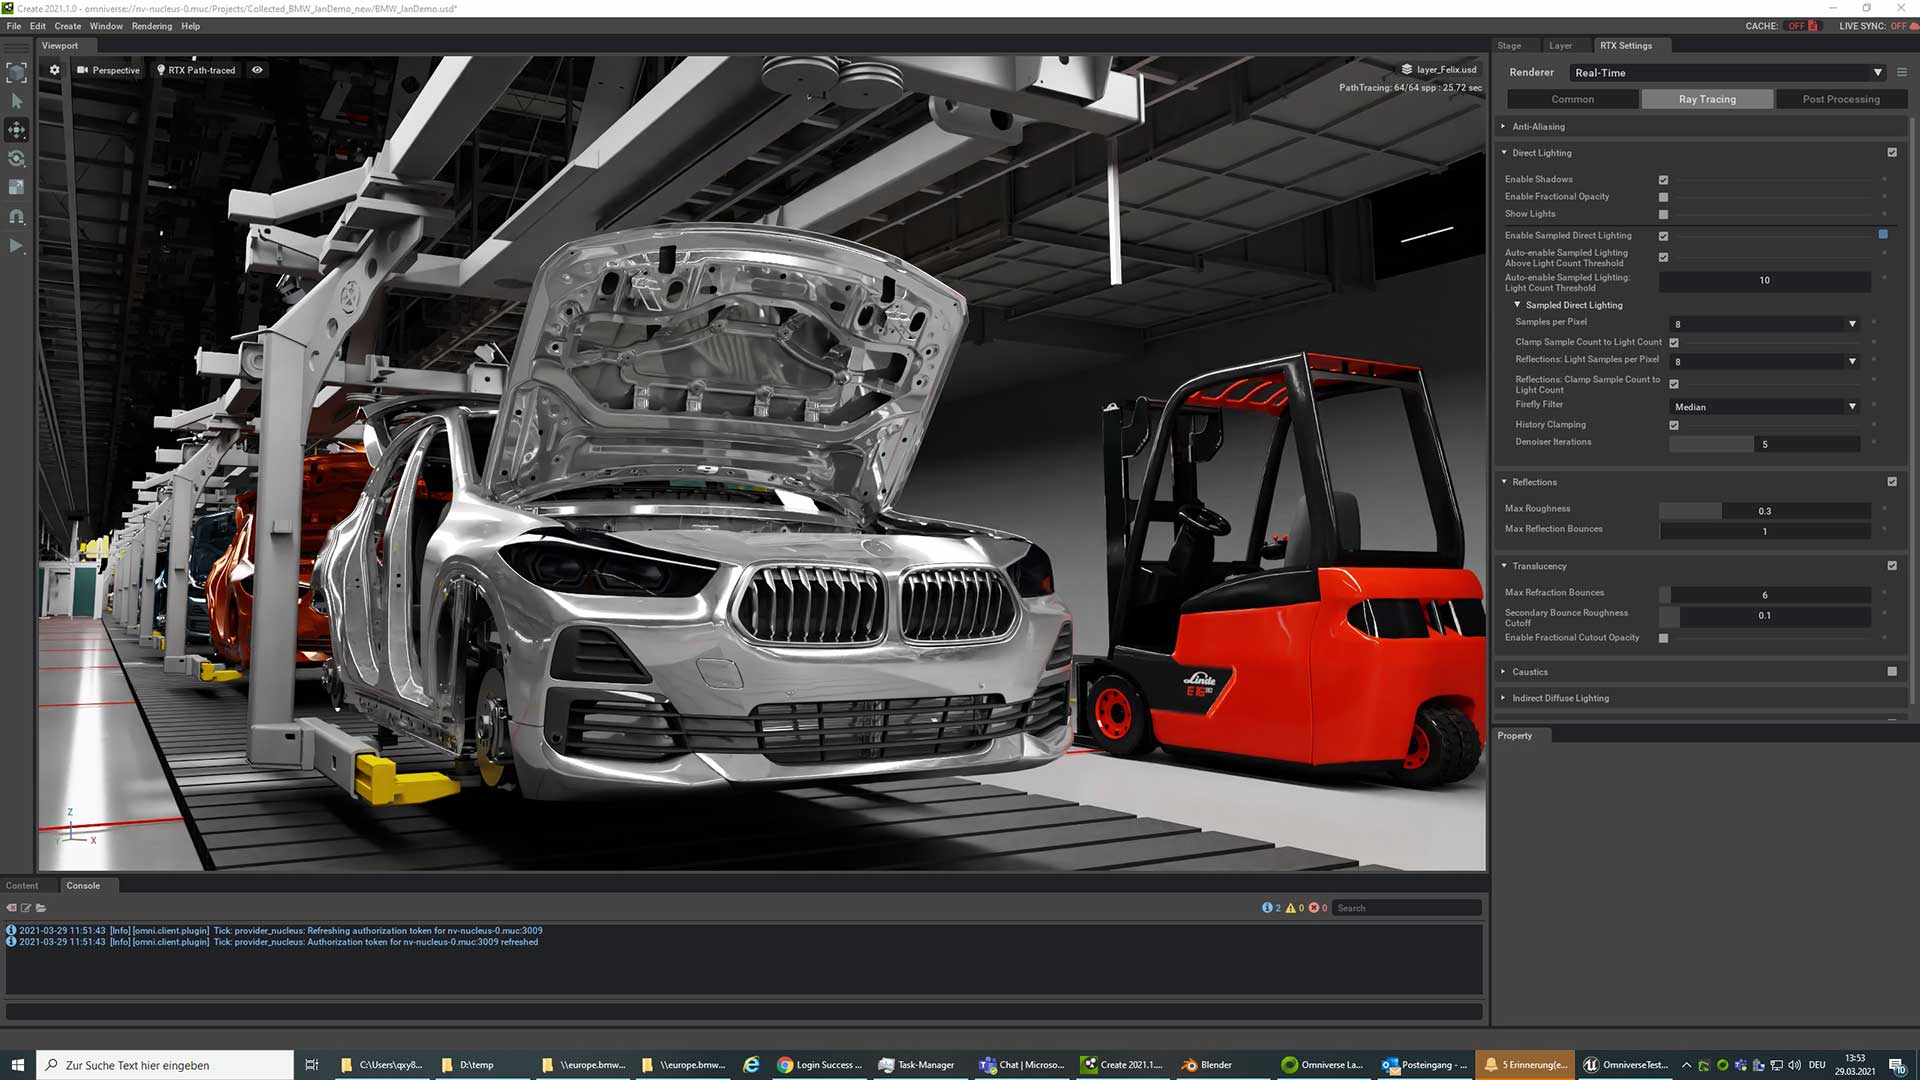 BMW is using the meteverse to assist in car development. Image: BMW.